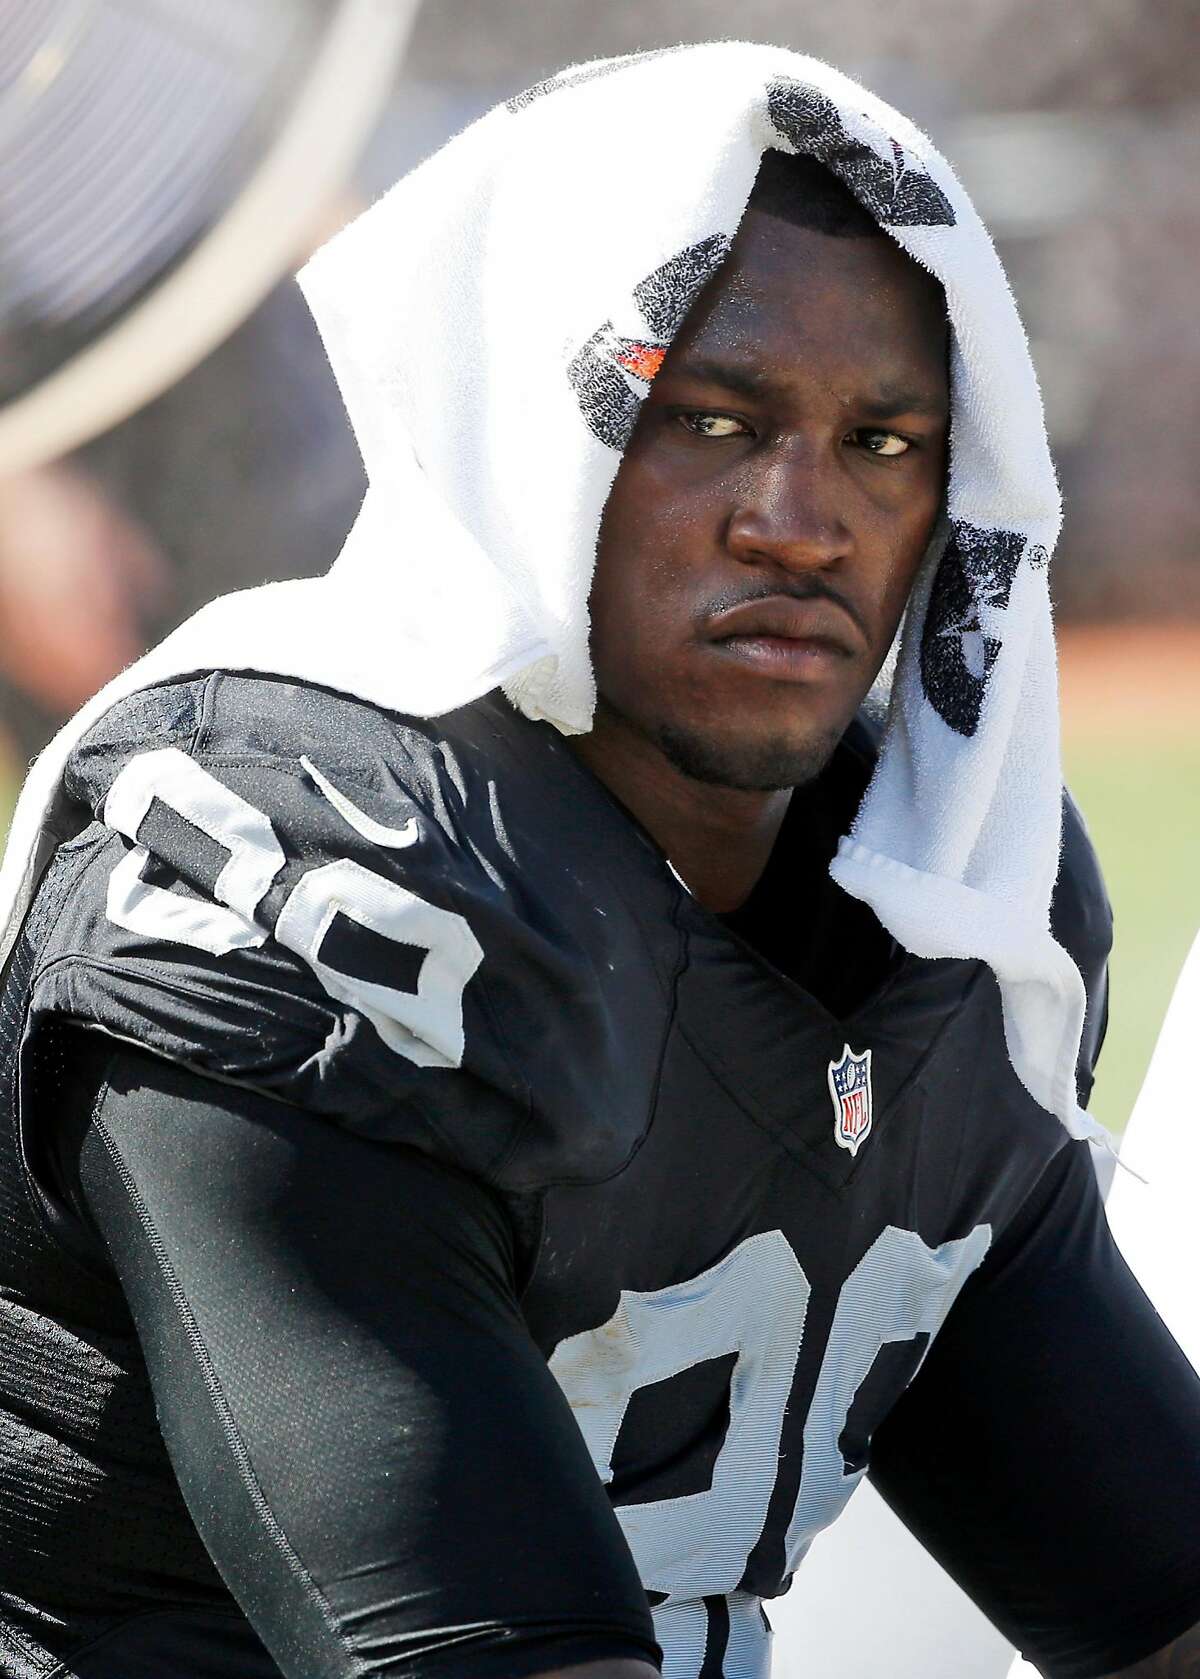 FILE - In this Sept. 20, 2015, file photo, Oakland Raiders defensive end Aldon Smith (99) cools off during an NFL football game against the Baltimore Ravens in Oakland , Calif. Every year, there are blue chippers carrying red flags. This season, the marketplace has Richie Incognito, Greg Hardy, Aldon Smith, Adam Jones, Andre Smith, Nick Fairley, Percy Harvin and Junior Galette. Lots of talent there, but plenty of locker room and off-field concerns, too. (AP Photo/Tony Avelar, File)